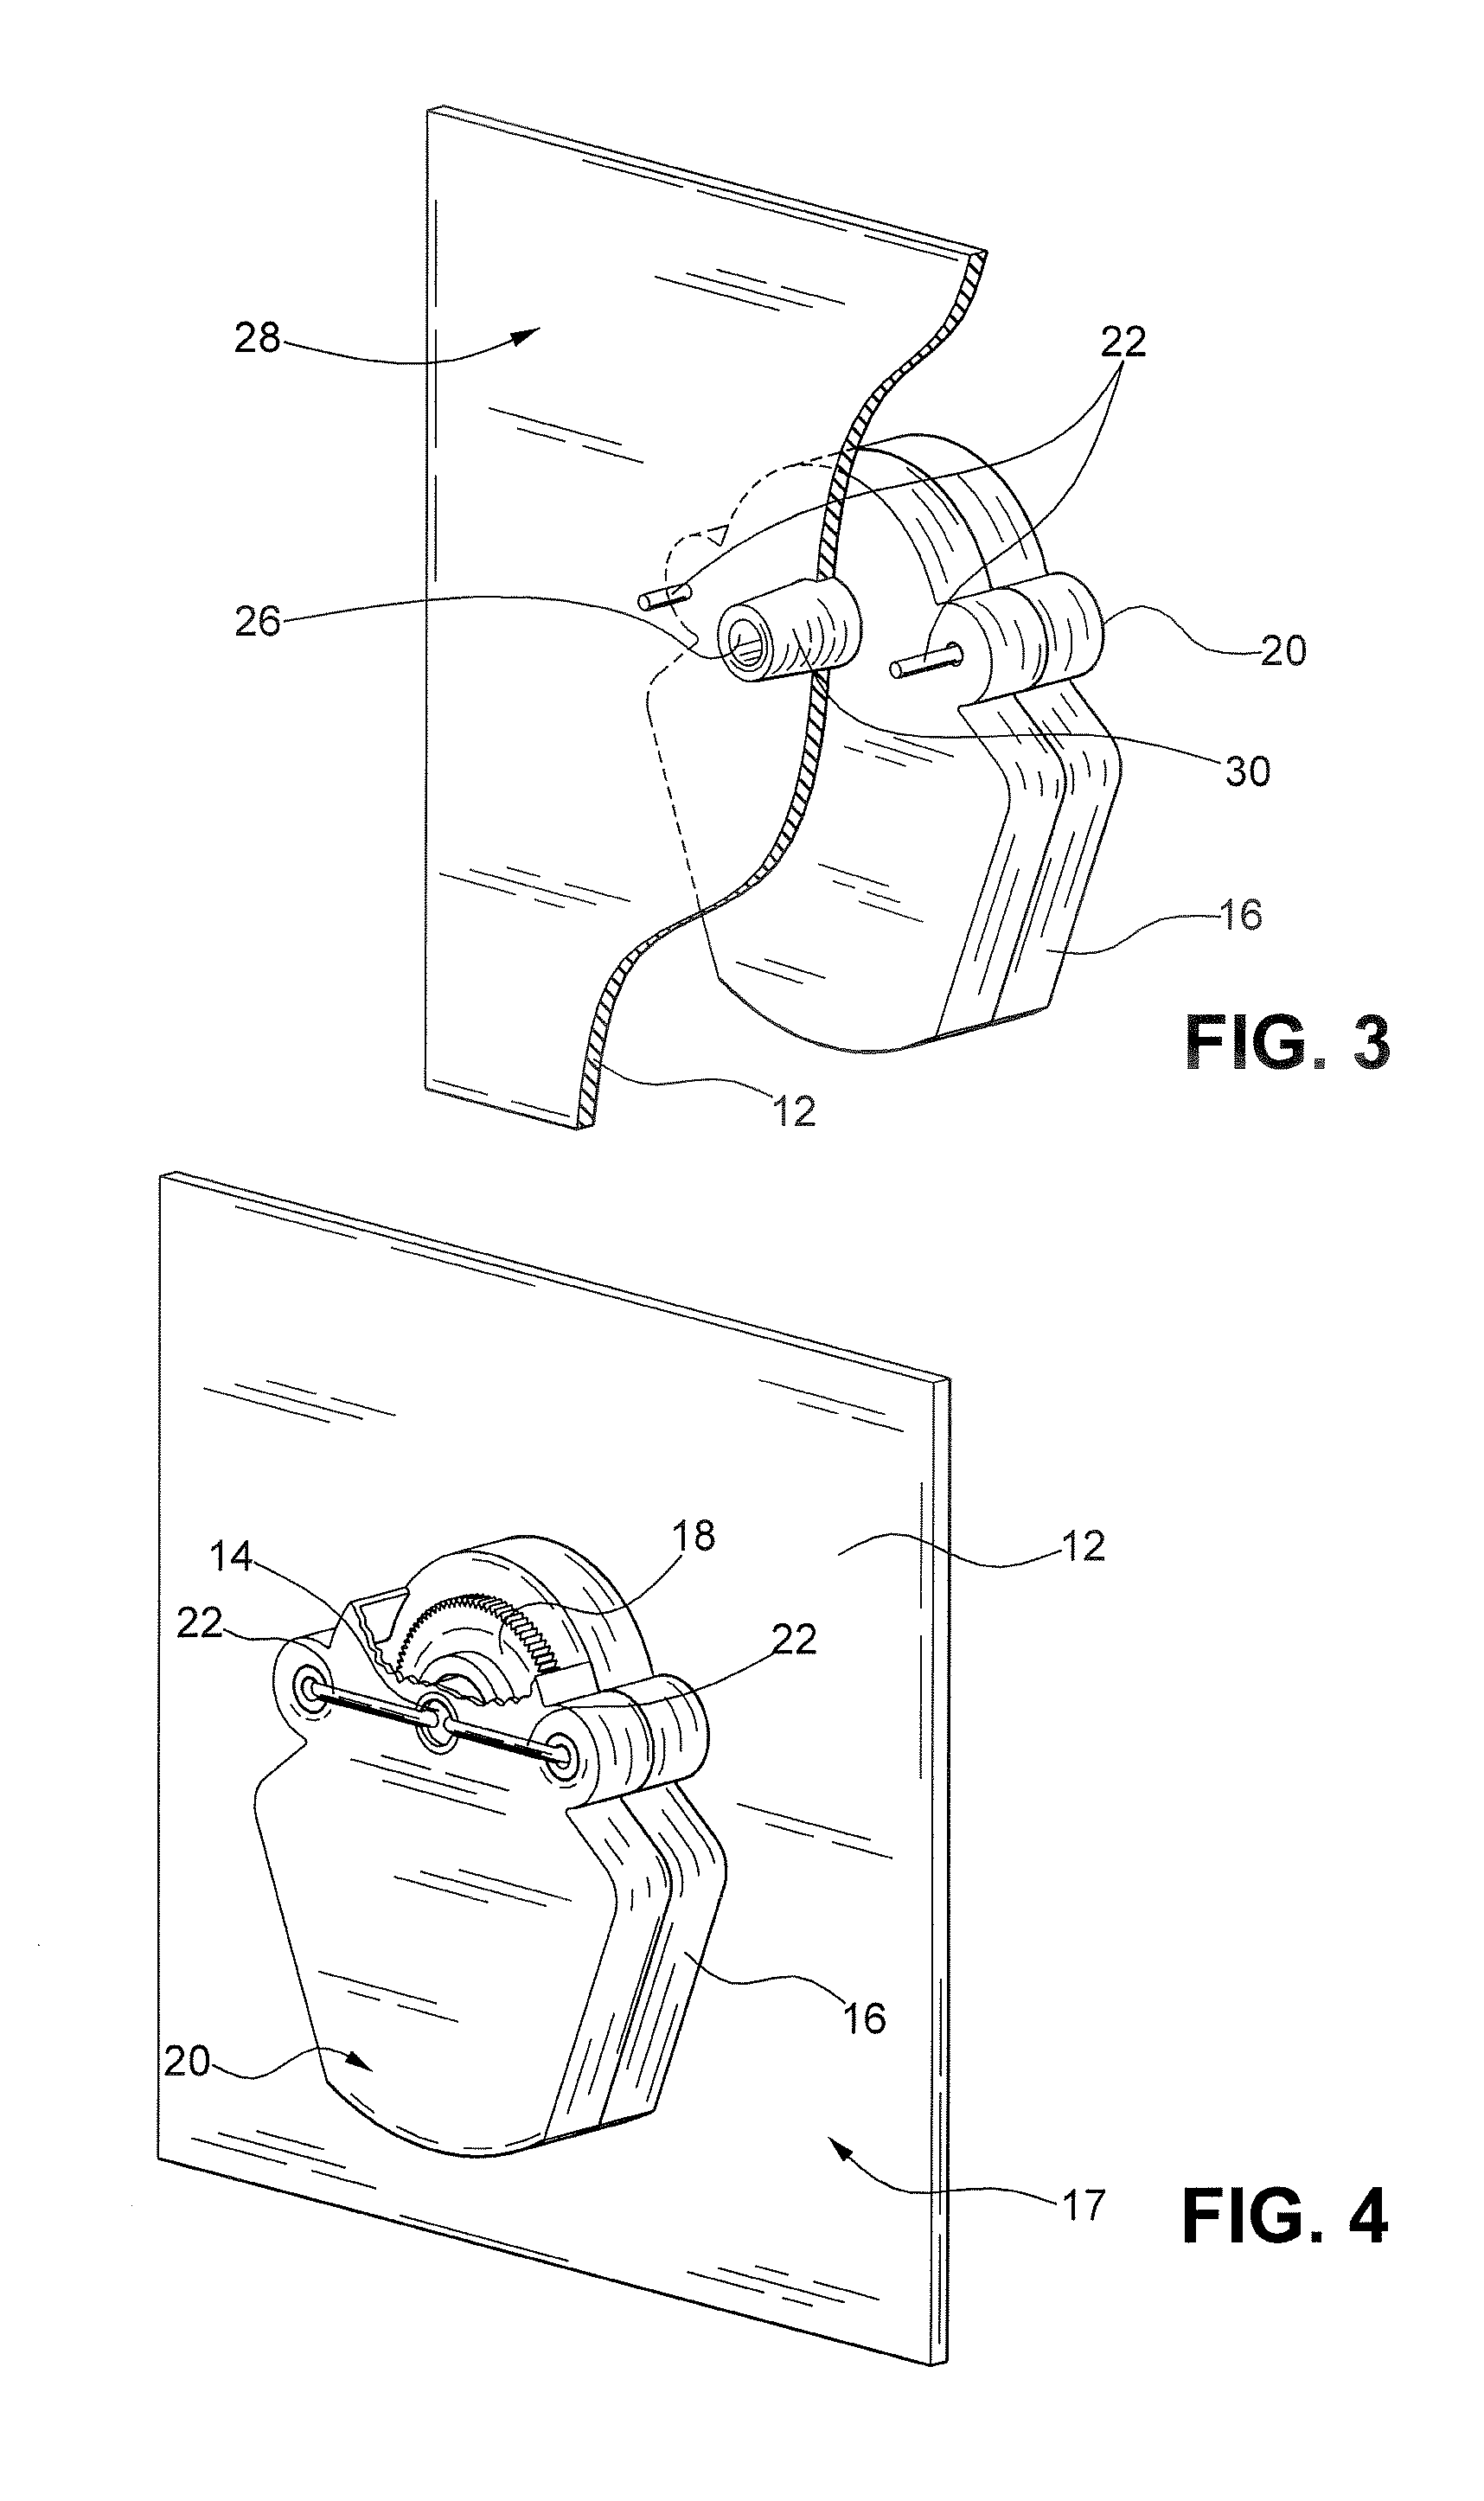 Rear mount shaftless motor and lighting system